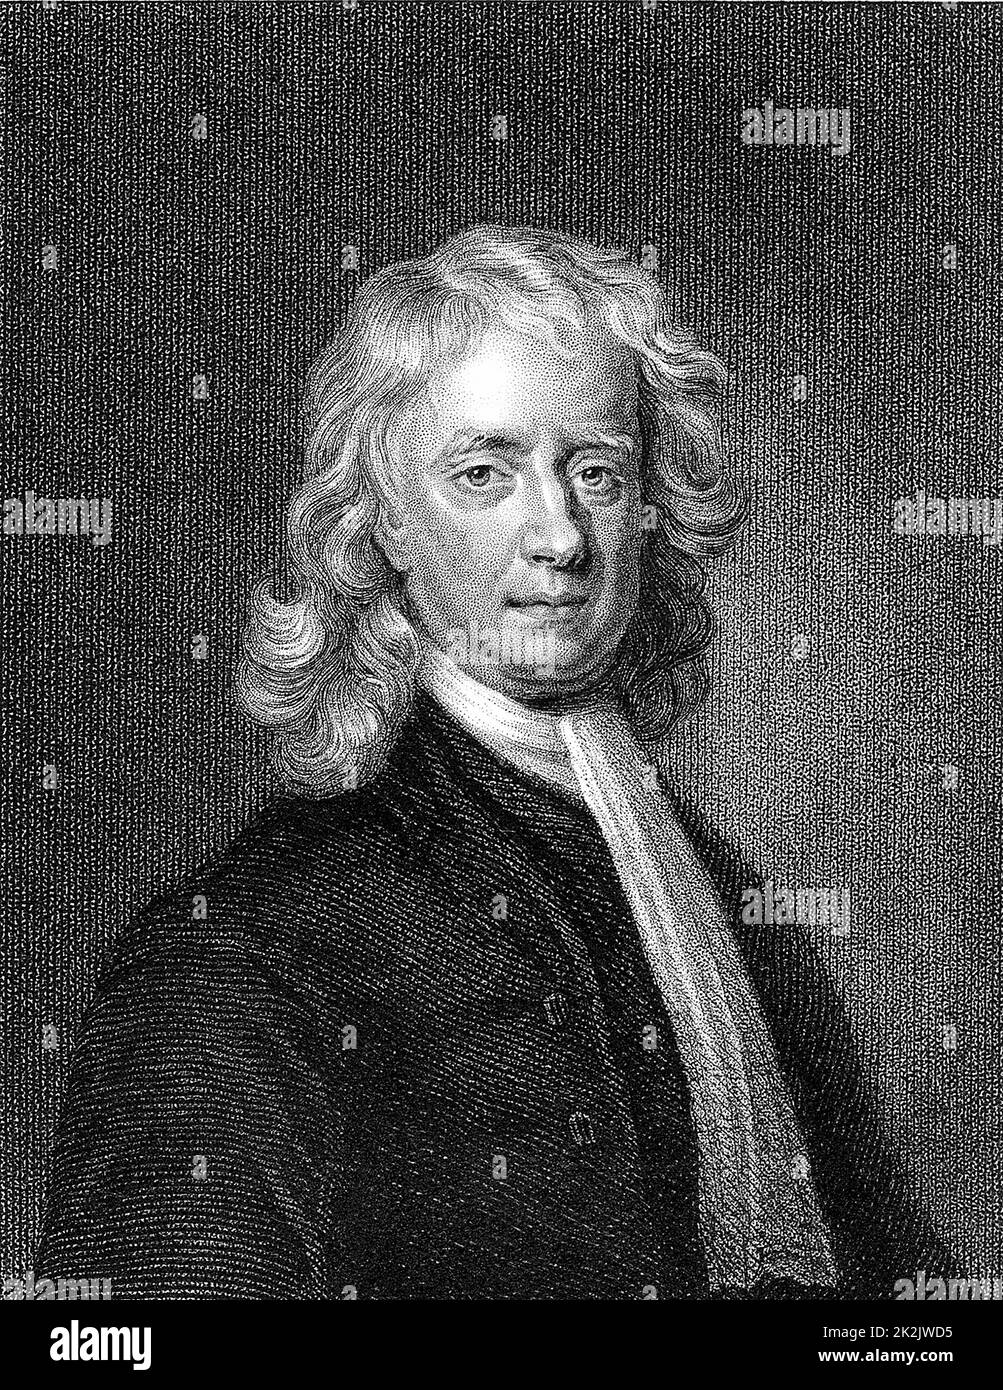 Isaac Newton (1642-1727) English mathematician and physicist. Engraving after the portrait by Enoch Seeman Stock Photo